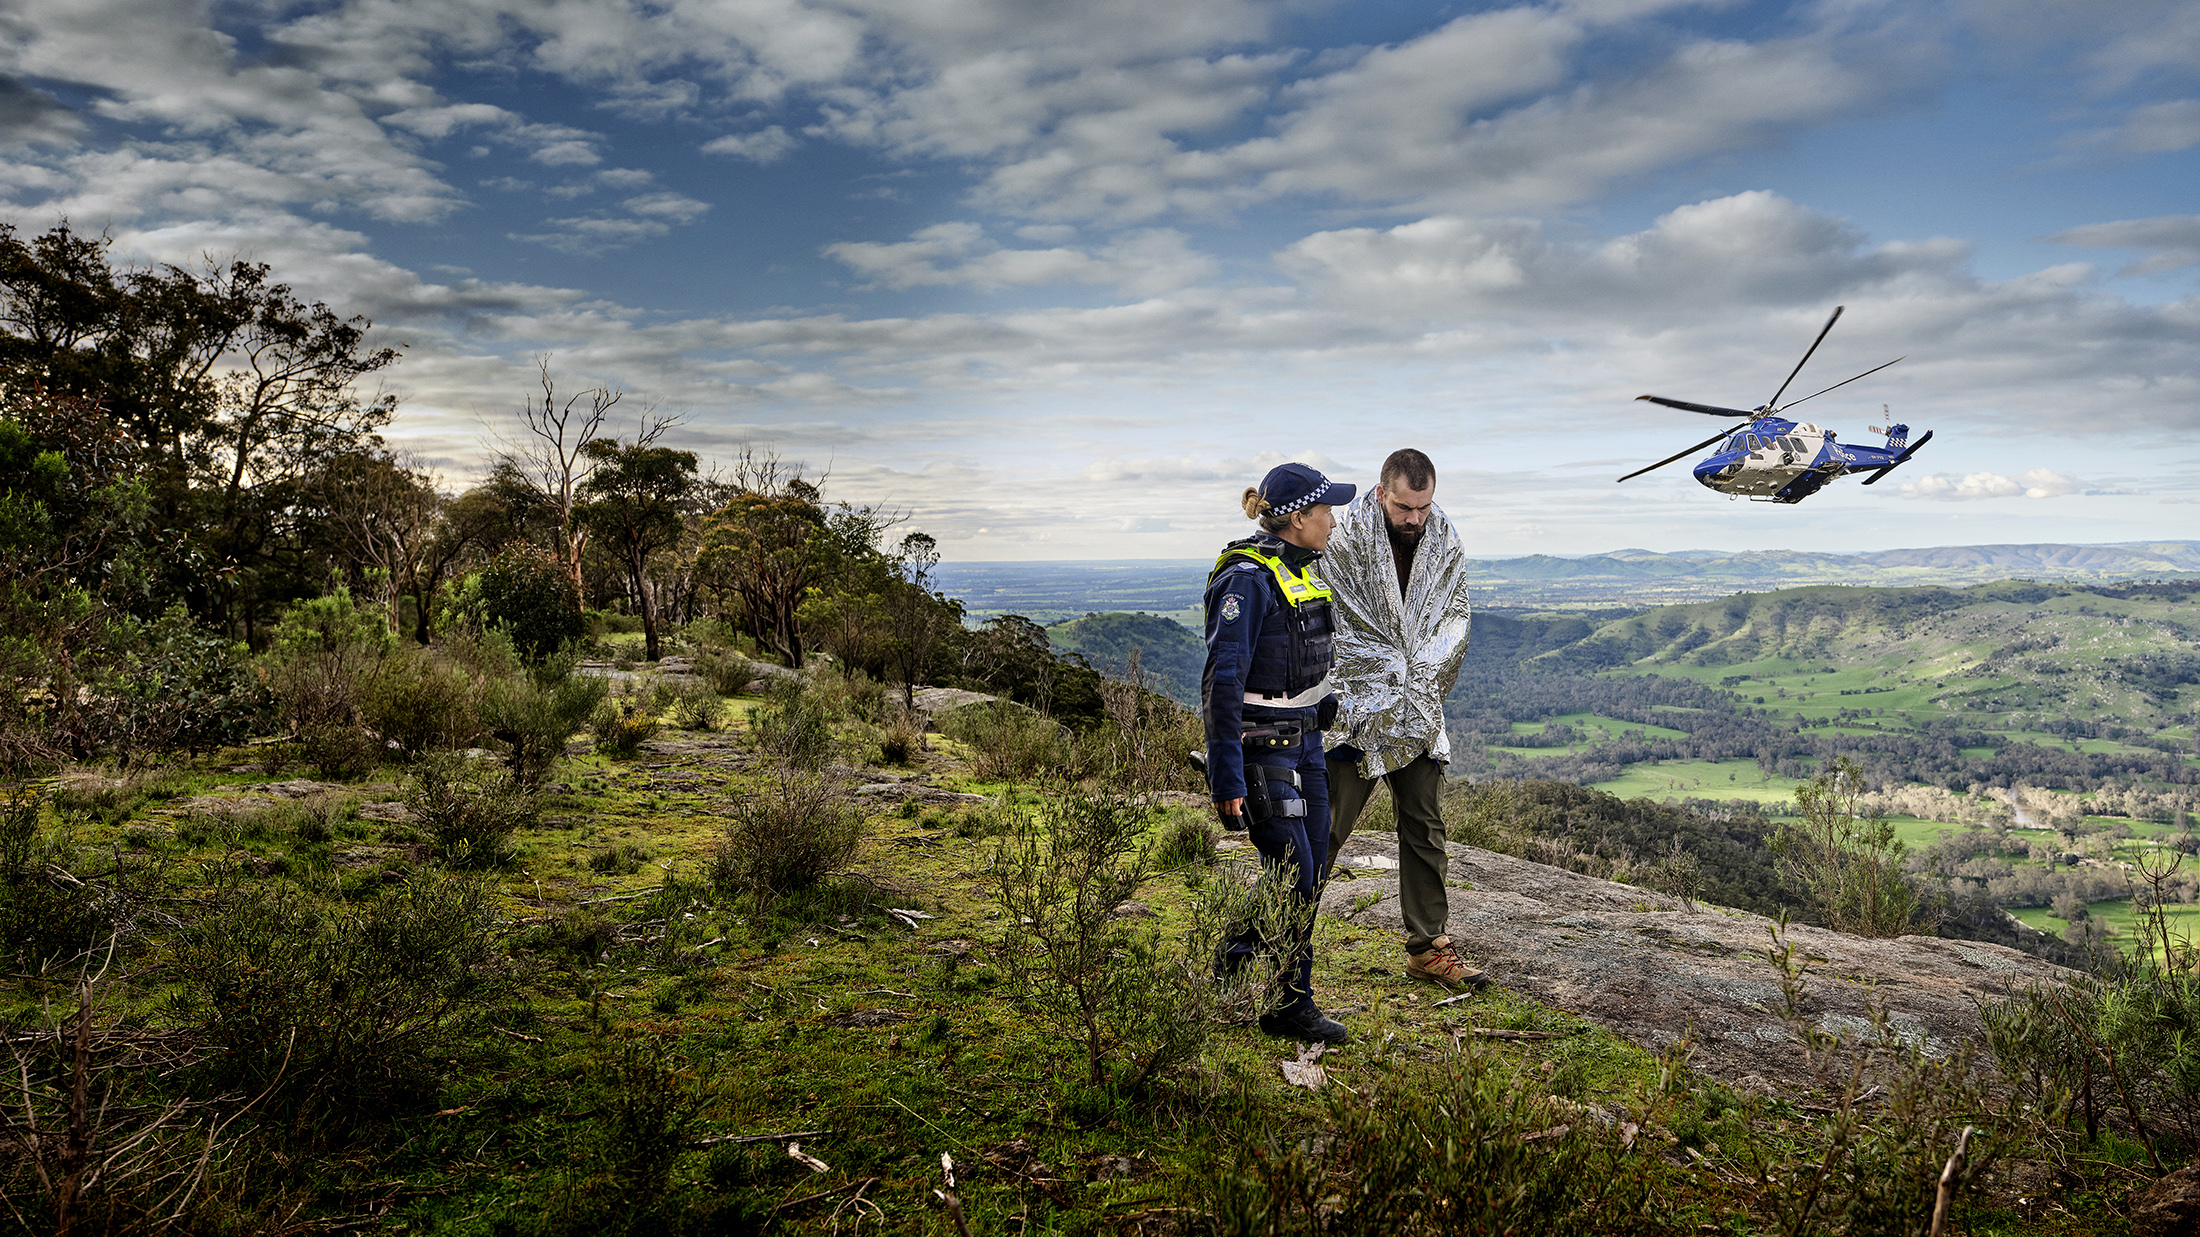 campaign-thom-rigney-professional-photographer-advertising-commissioned-landscape-helicopter-australia-002